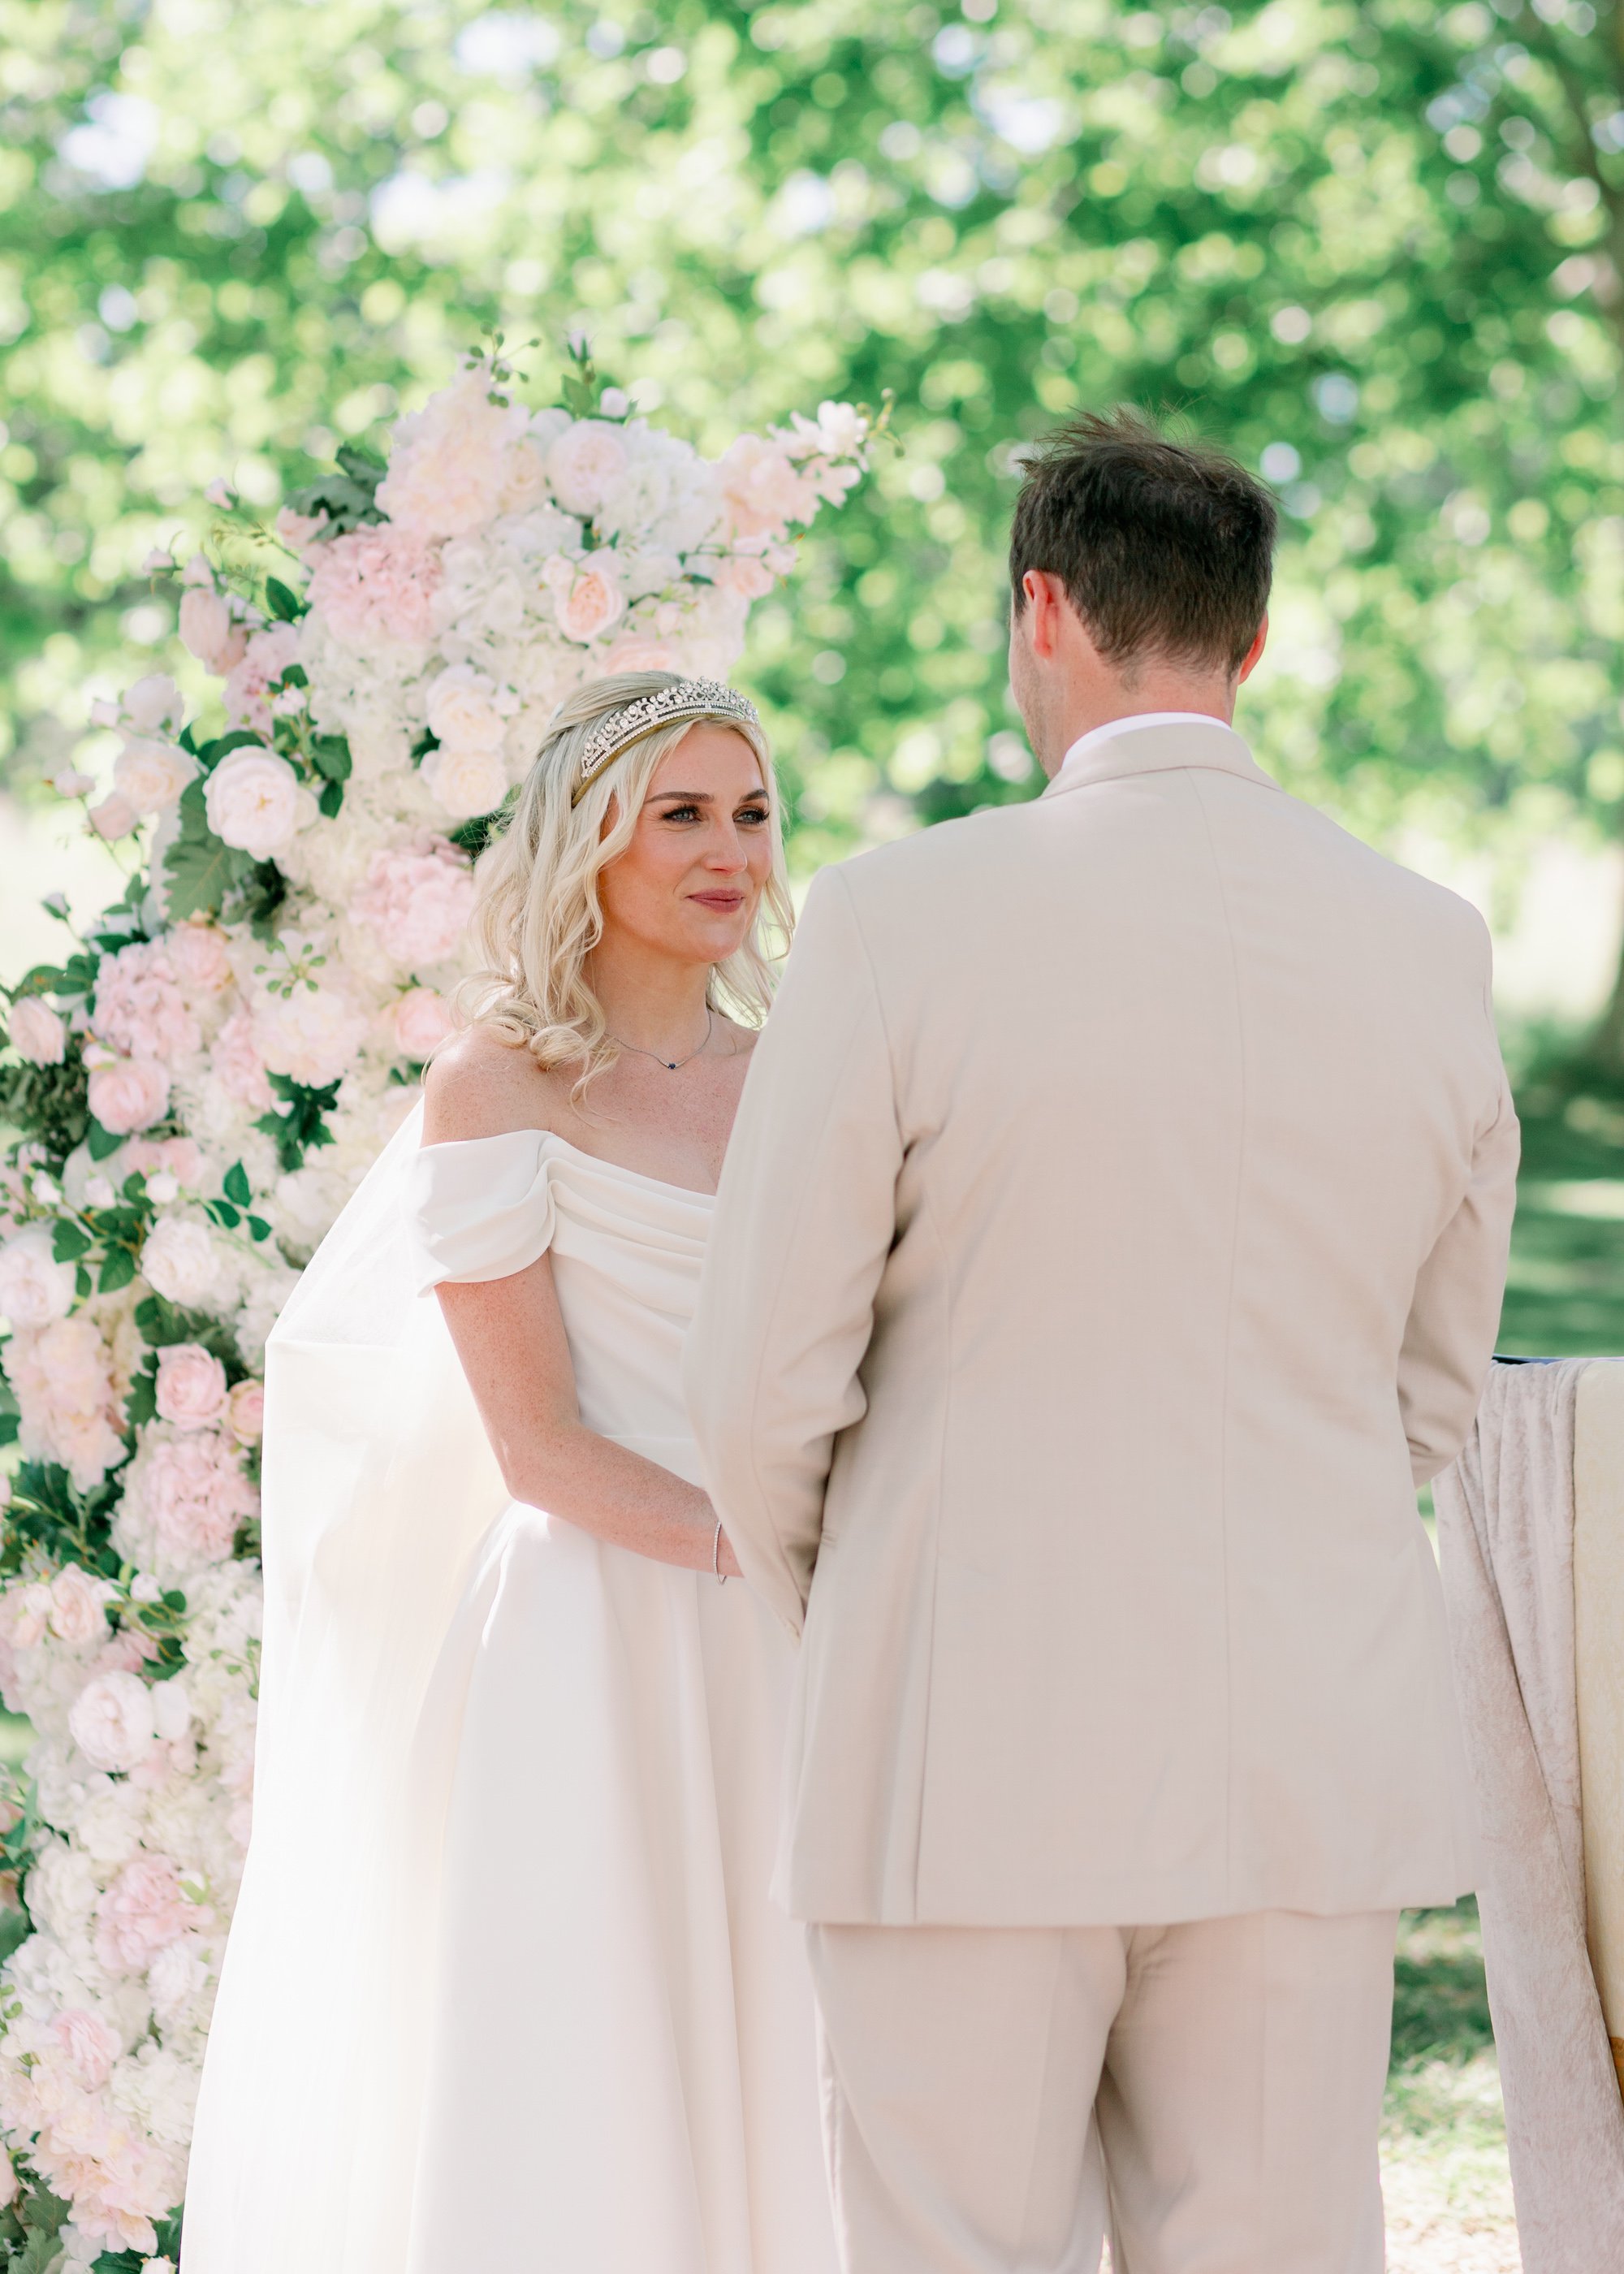 Stunning bride Georgia wore a Halfpenny London wedding dress on her special day